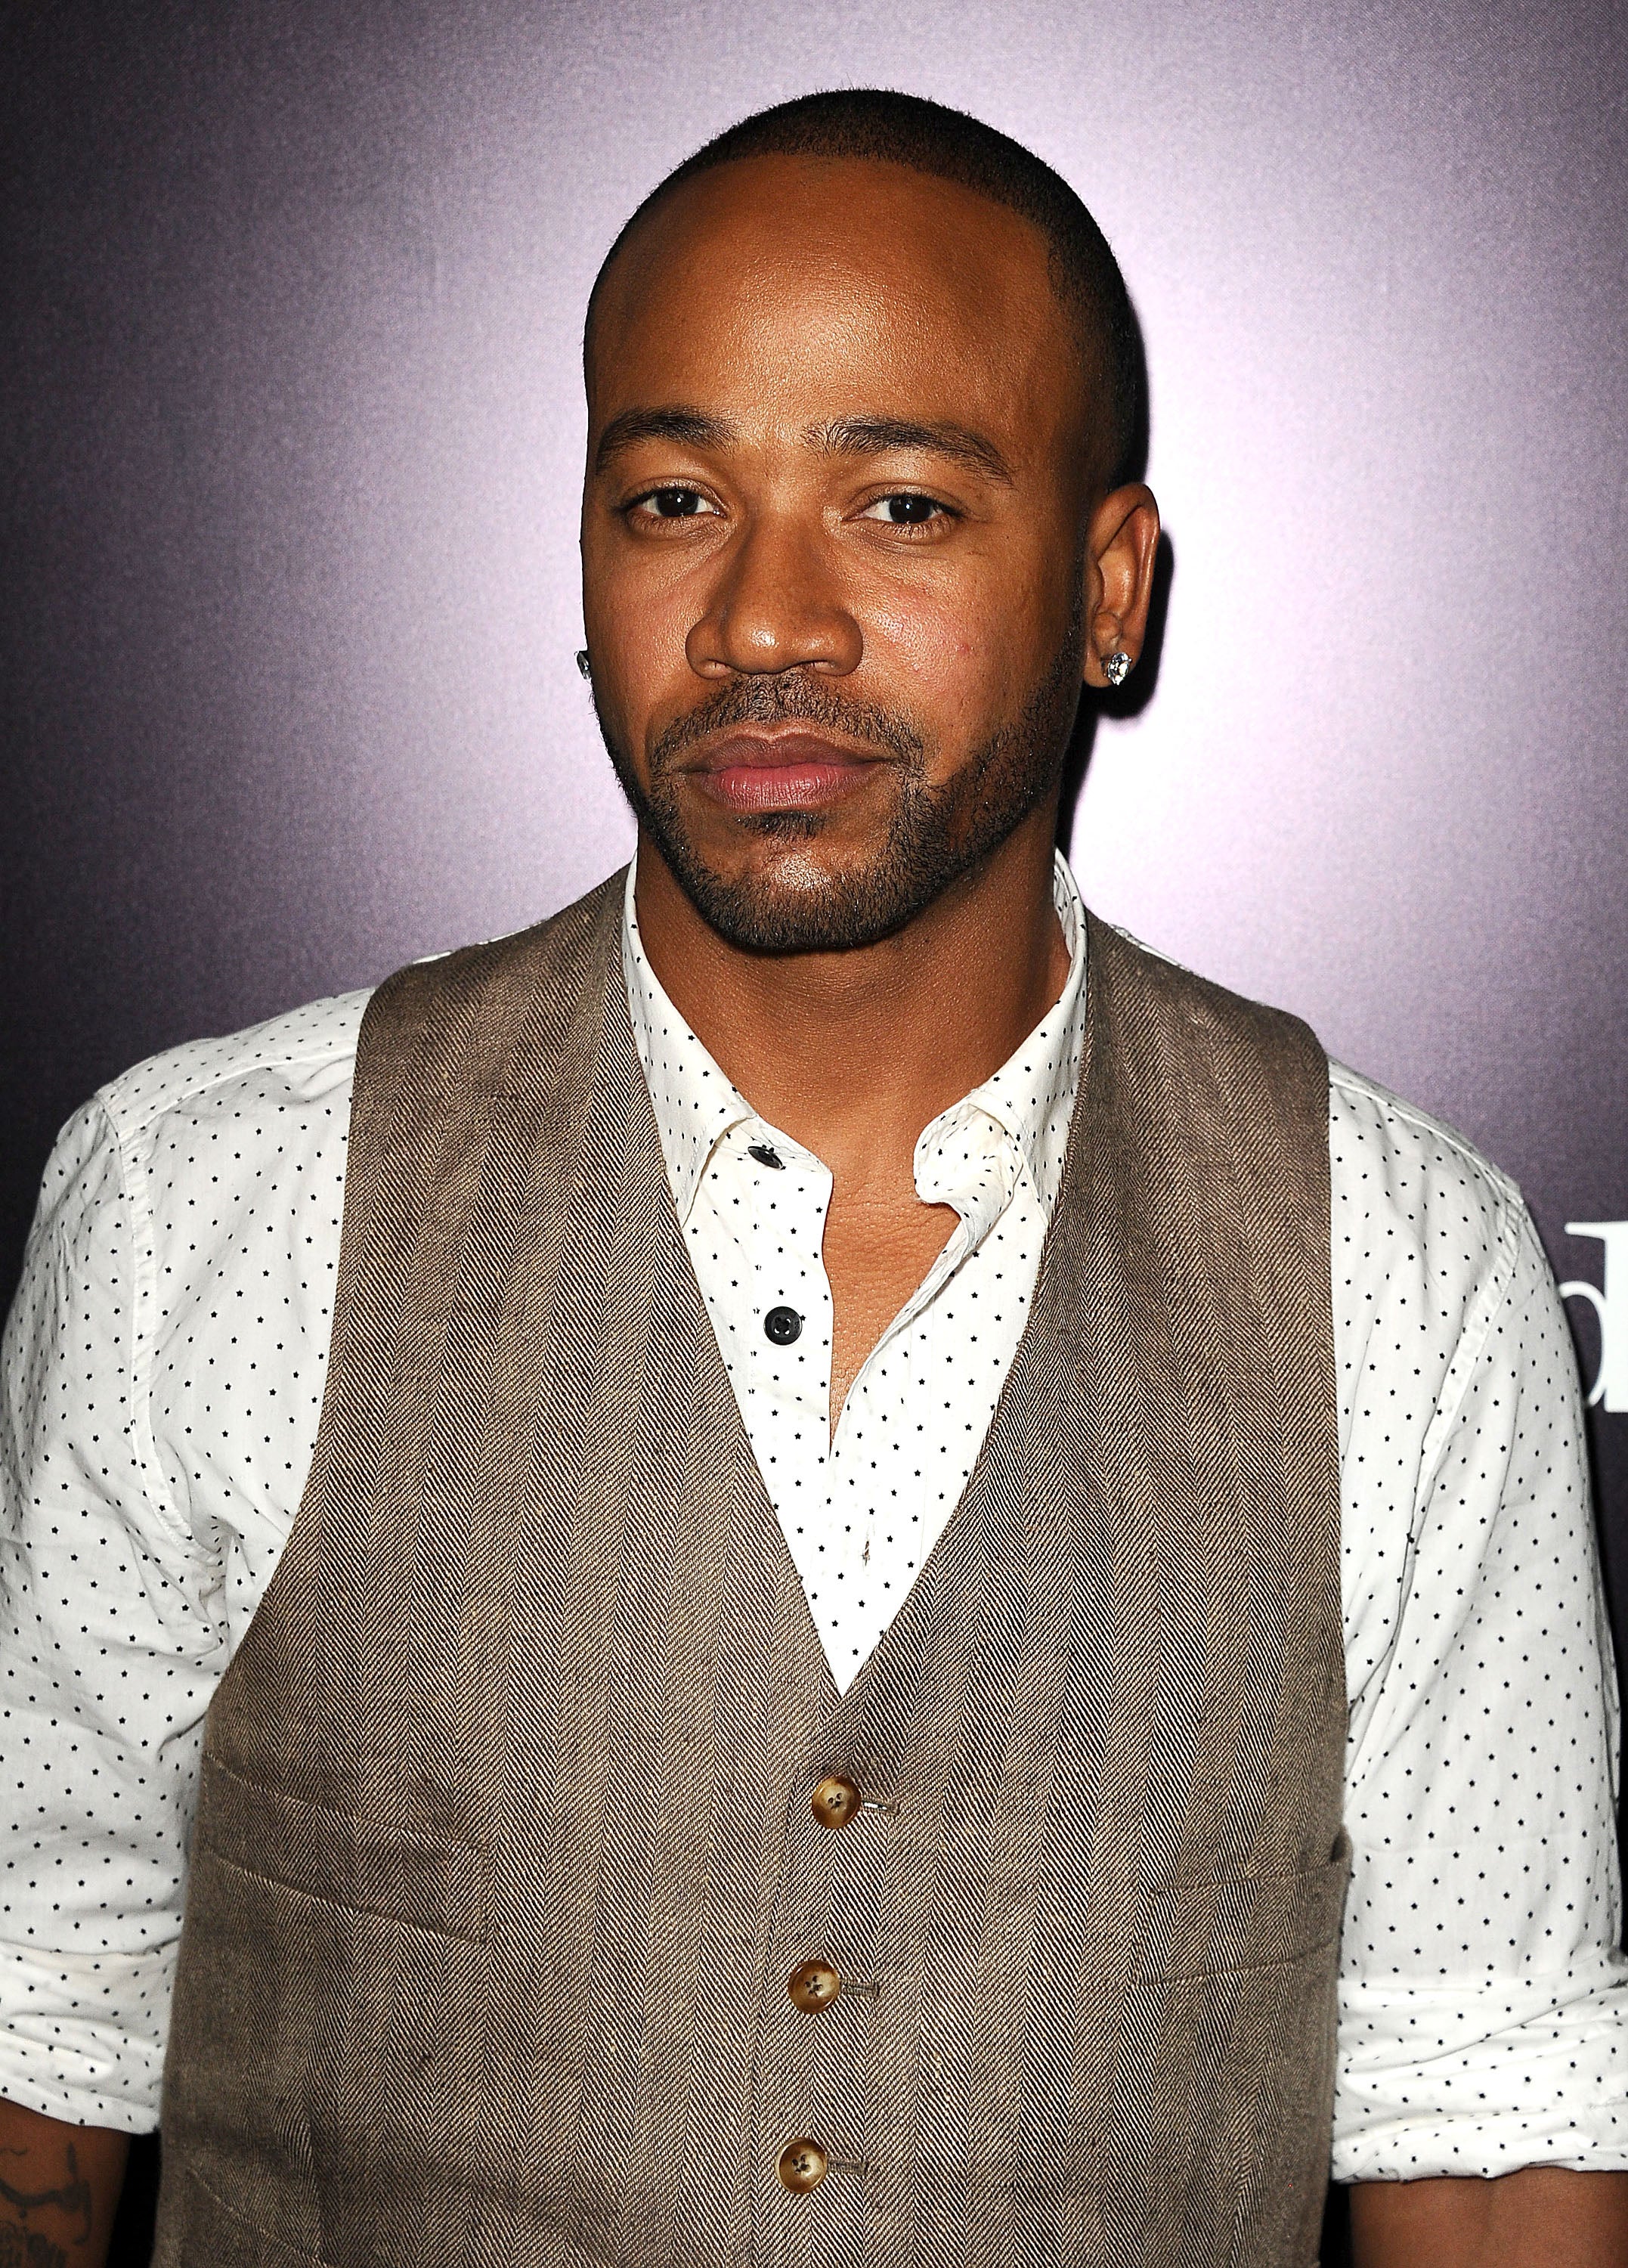 Former 'Scandal' Star Columbus Short To Spend A Year In Jail On Domestic Violence Charge
